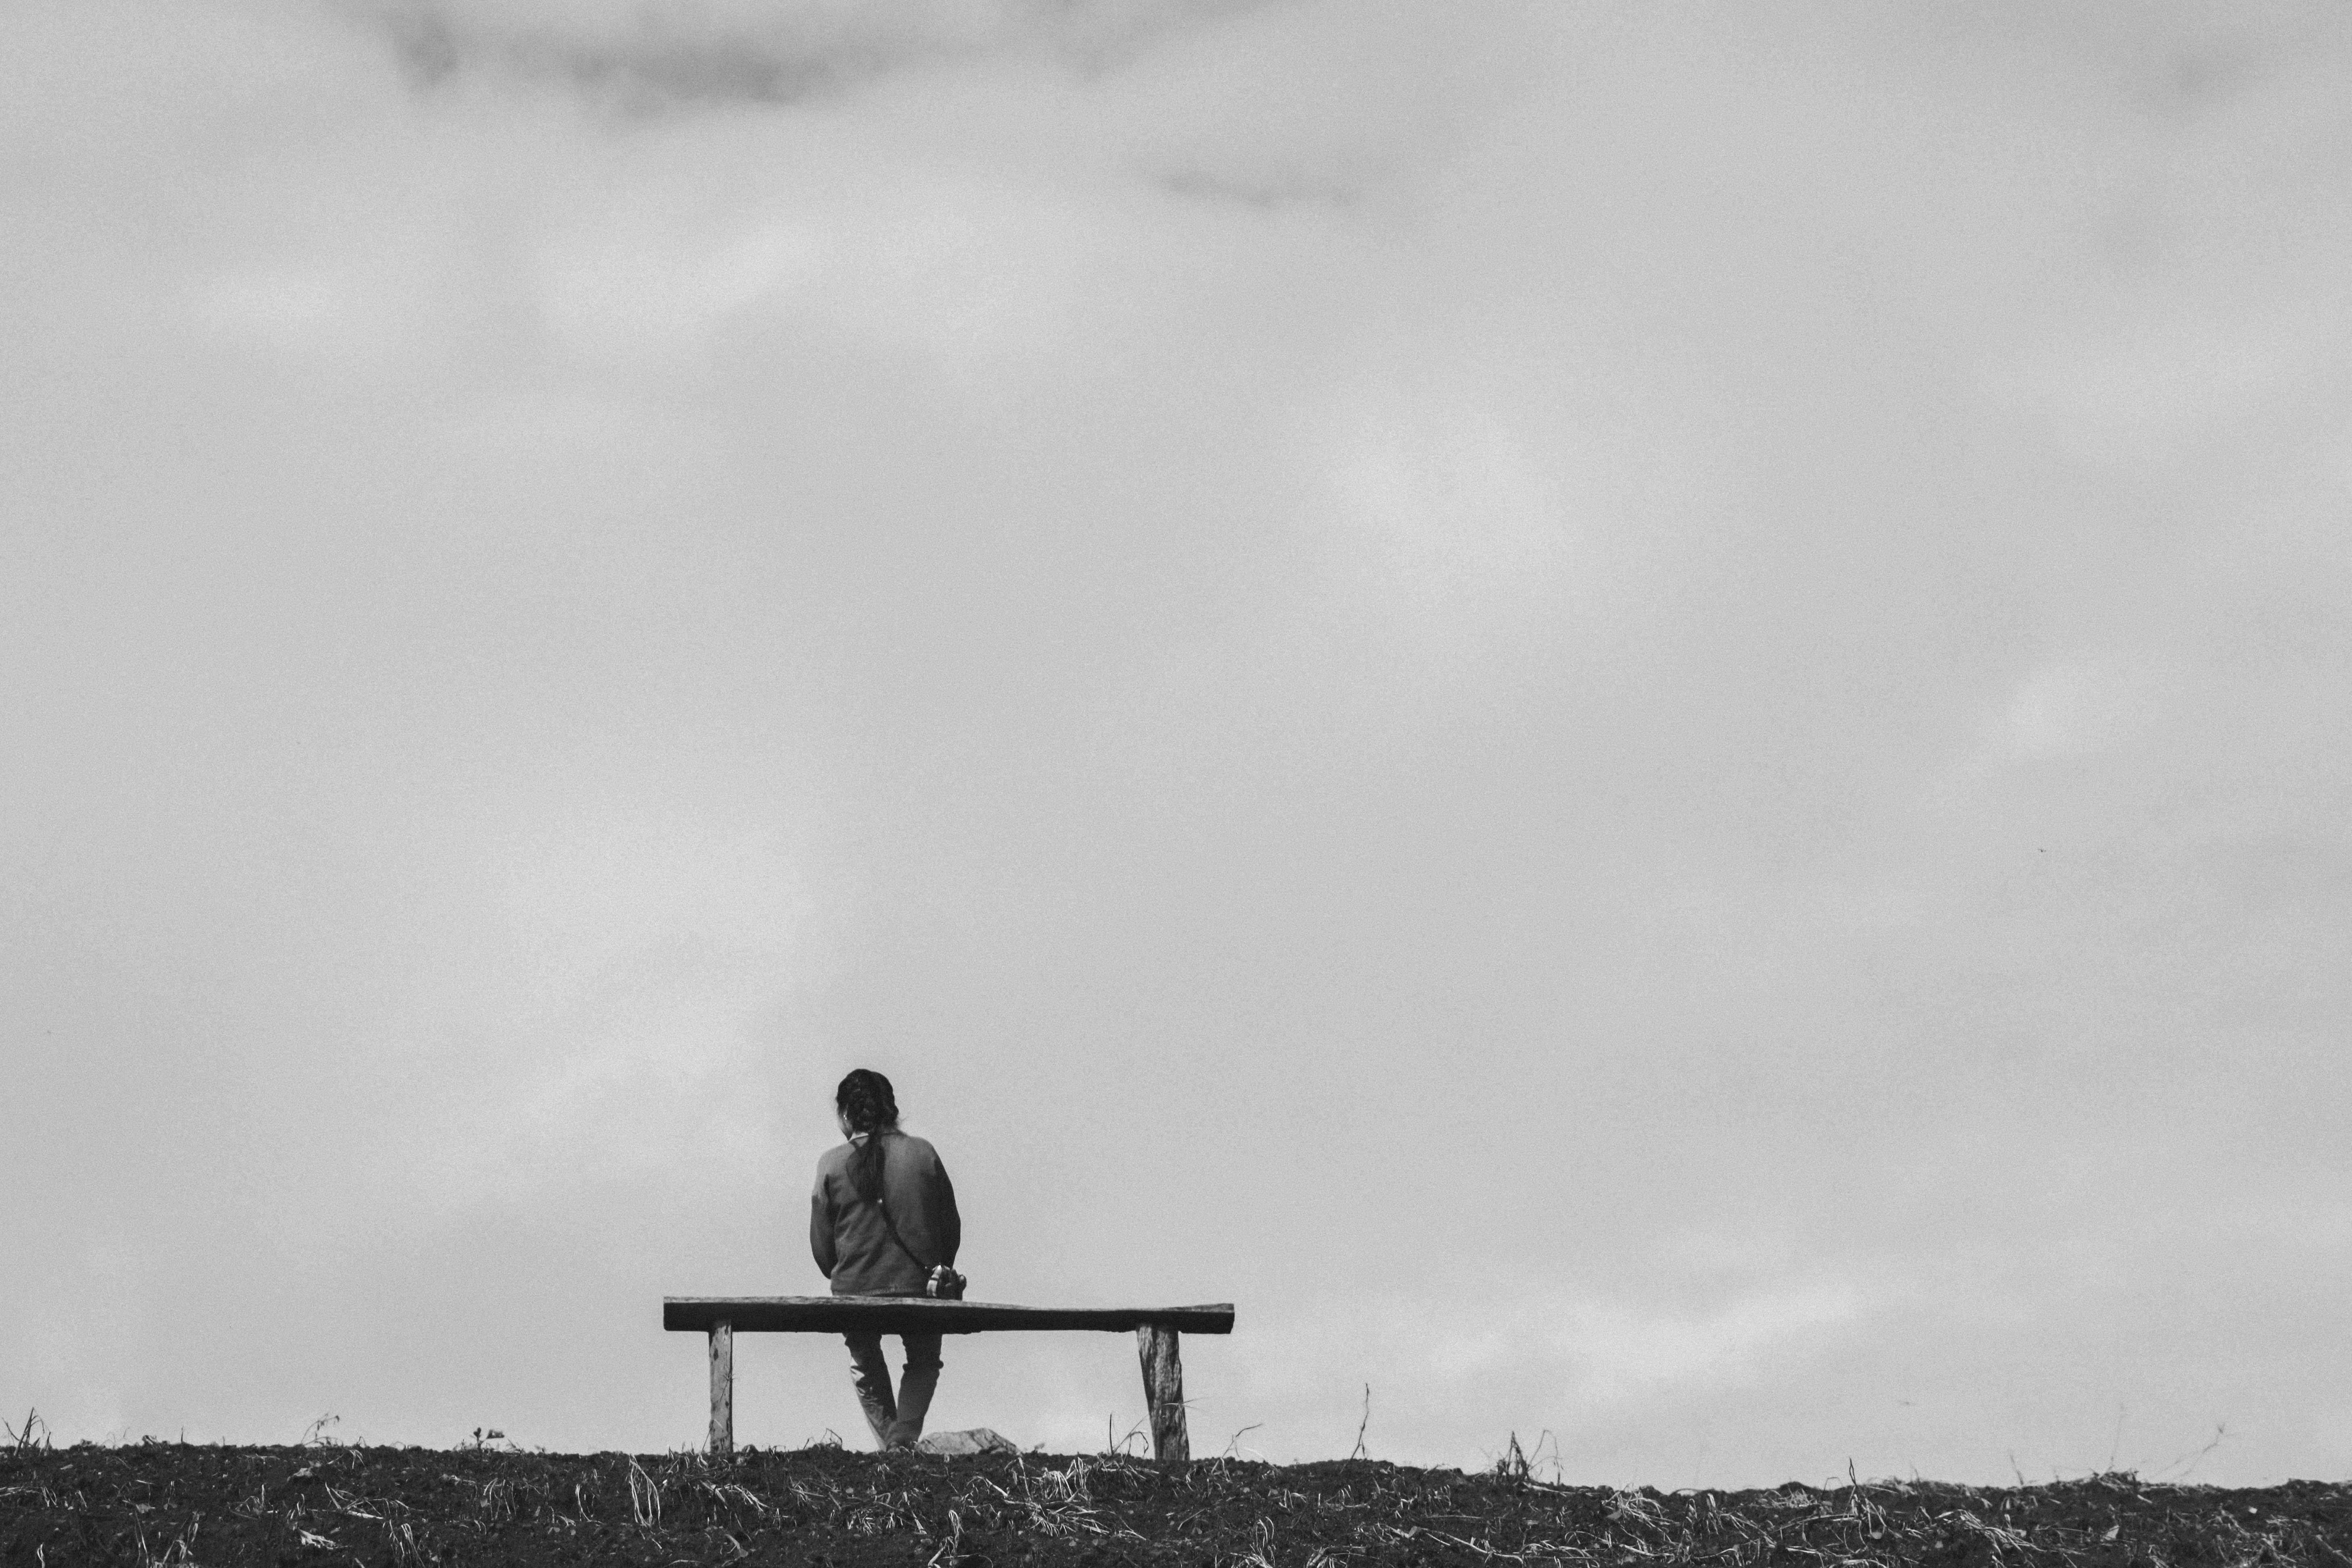 Full HD miscellanea, miscellaneous, bw, chb, human, person, loneliness, bench